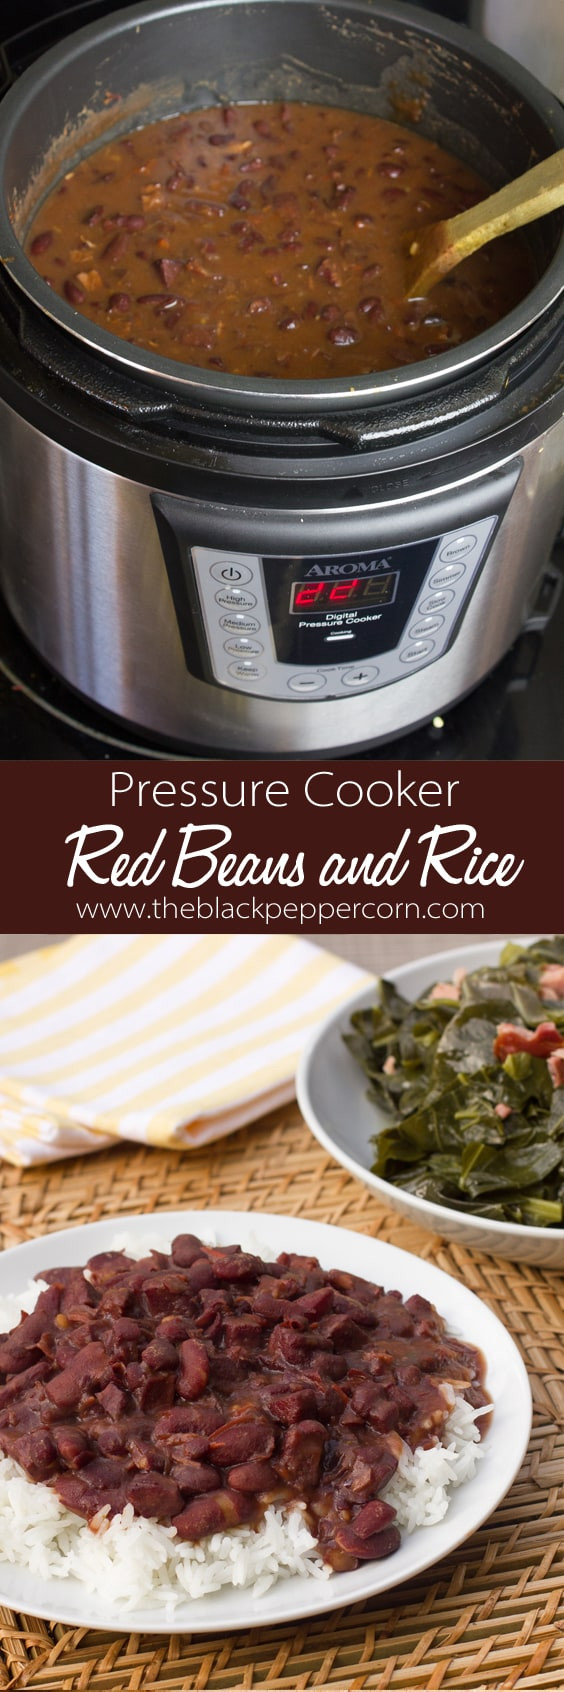 Pressure Cooker Black Beans And Rice
 Red Beans and Rice Pressure Cooker Recipe Instant Pot